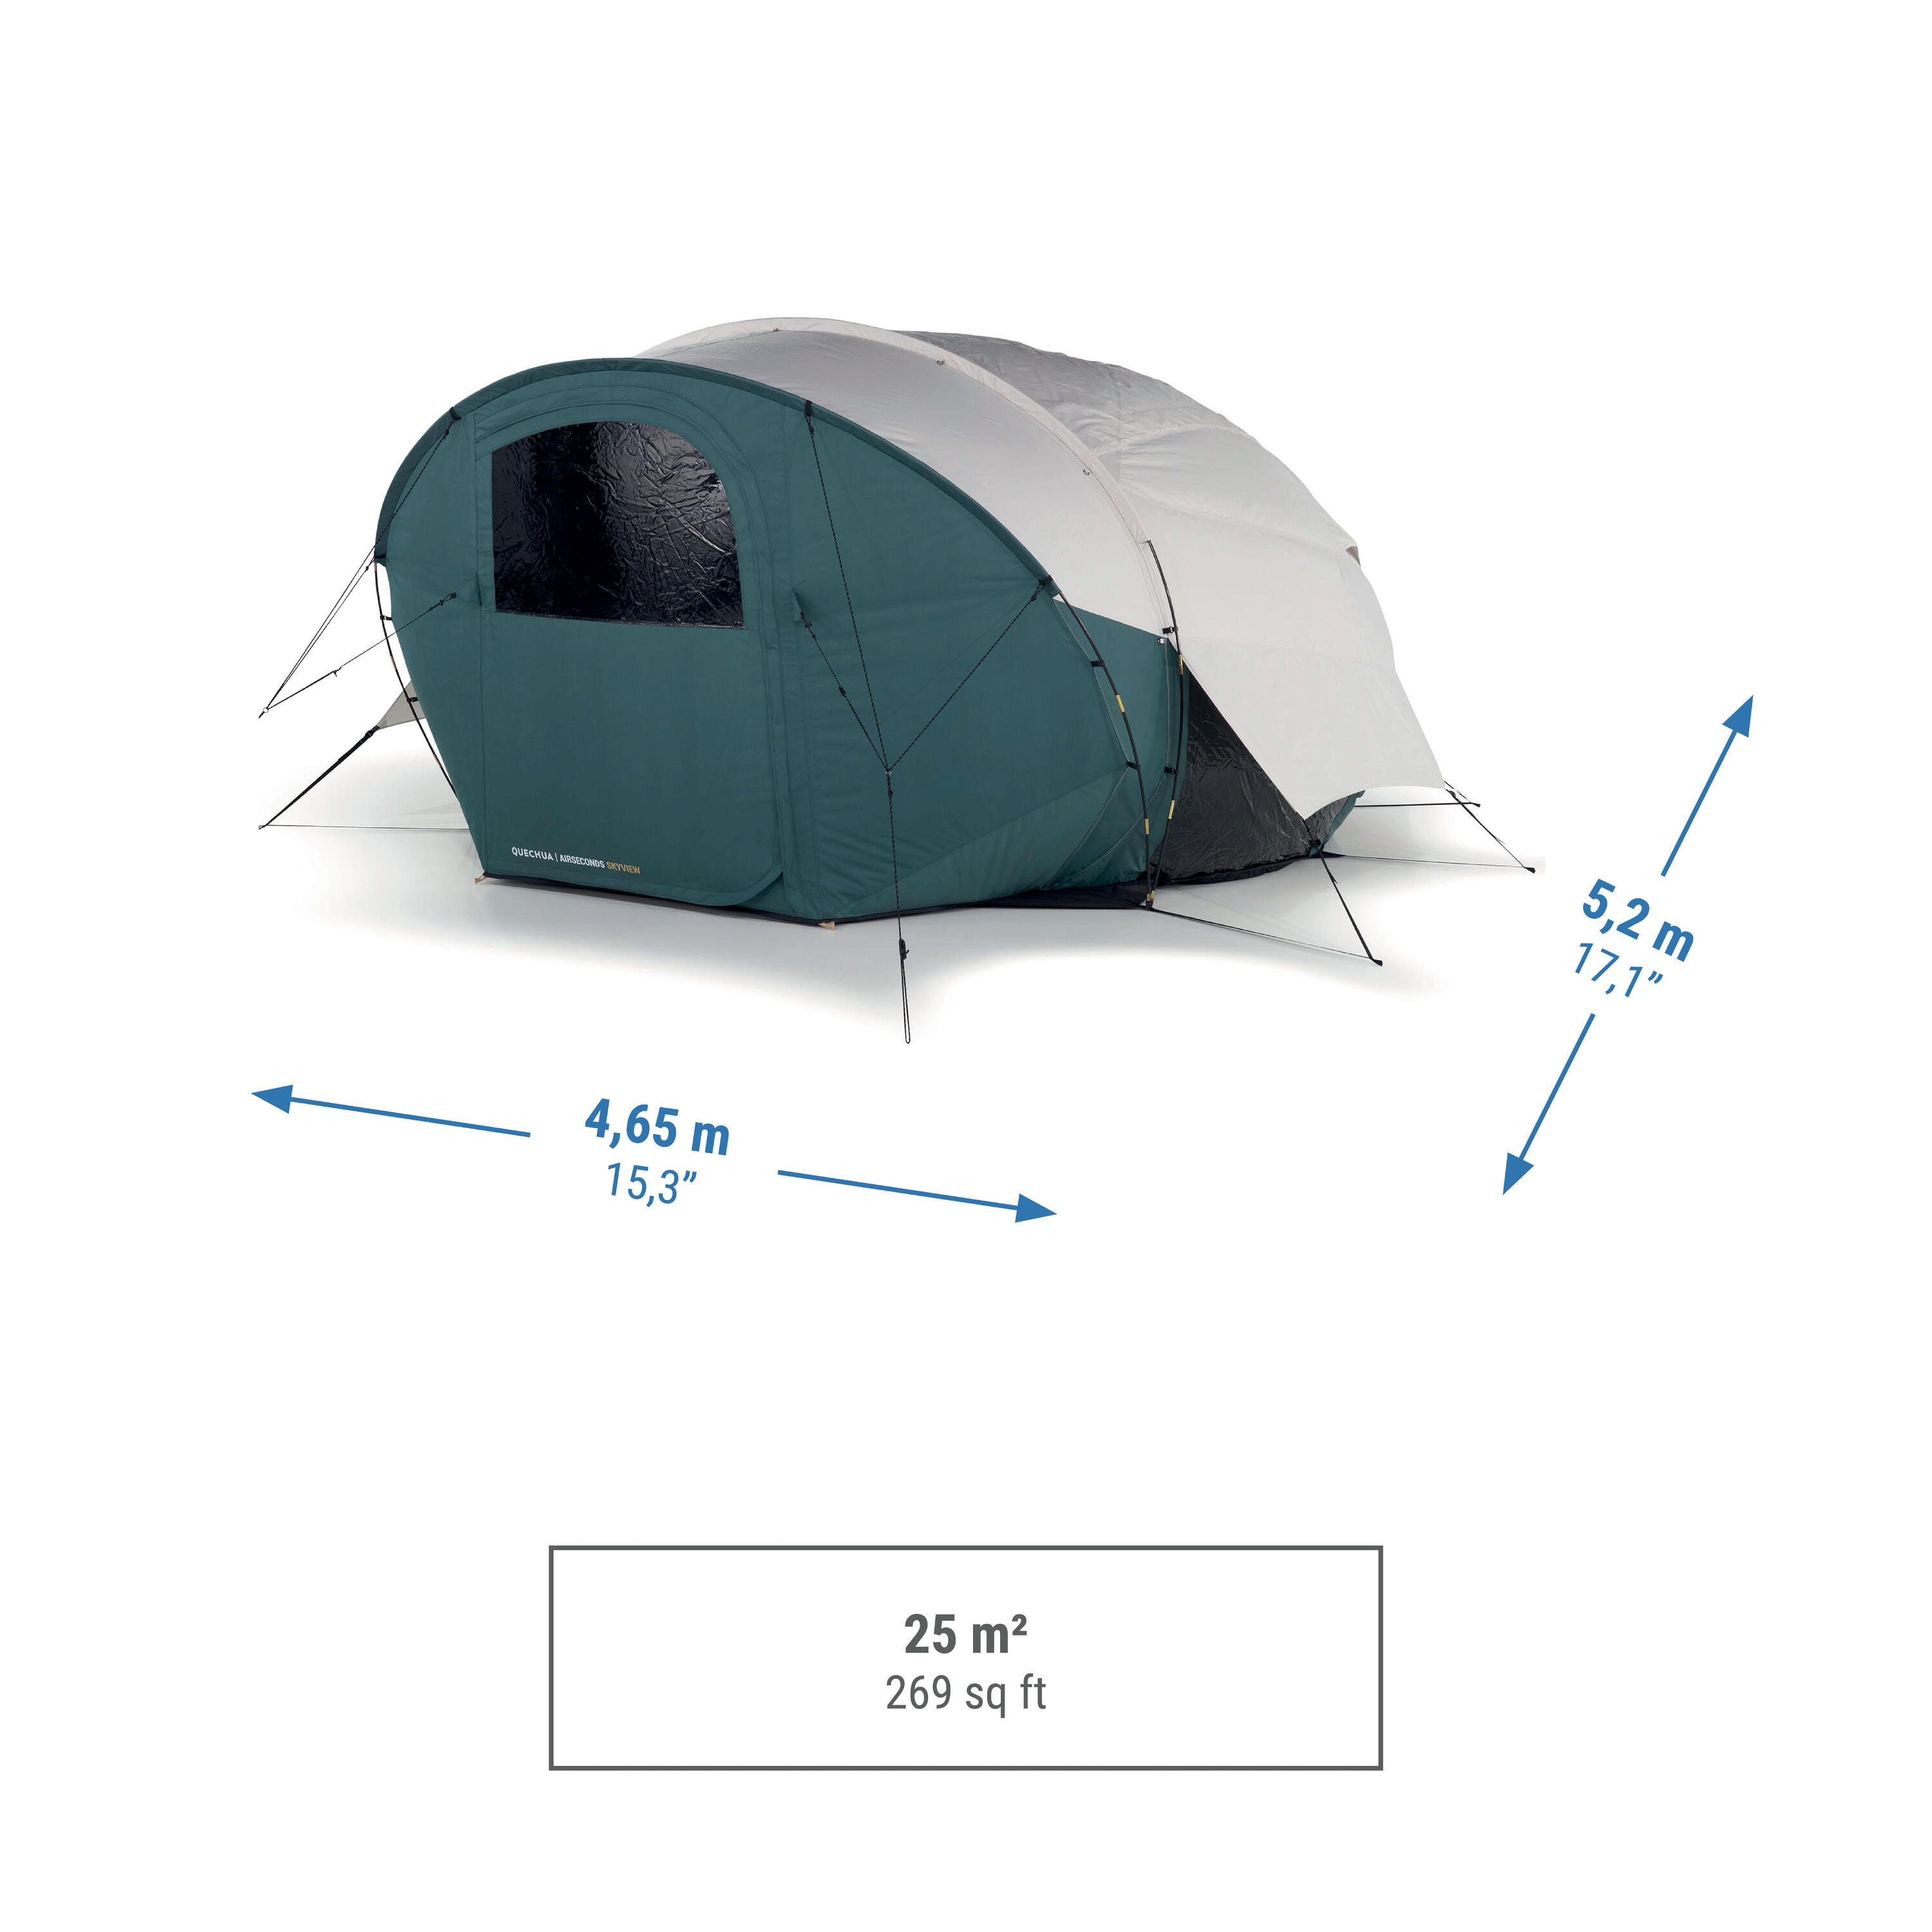 Camping Bubble Tent - AirSeconds Skyview Polycotton - 2 man - 1 Bedroom 5/23